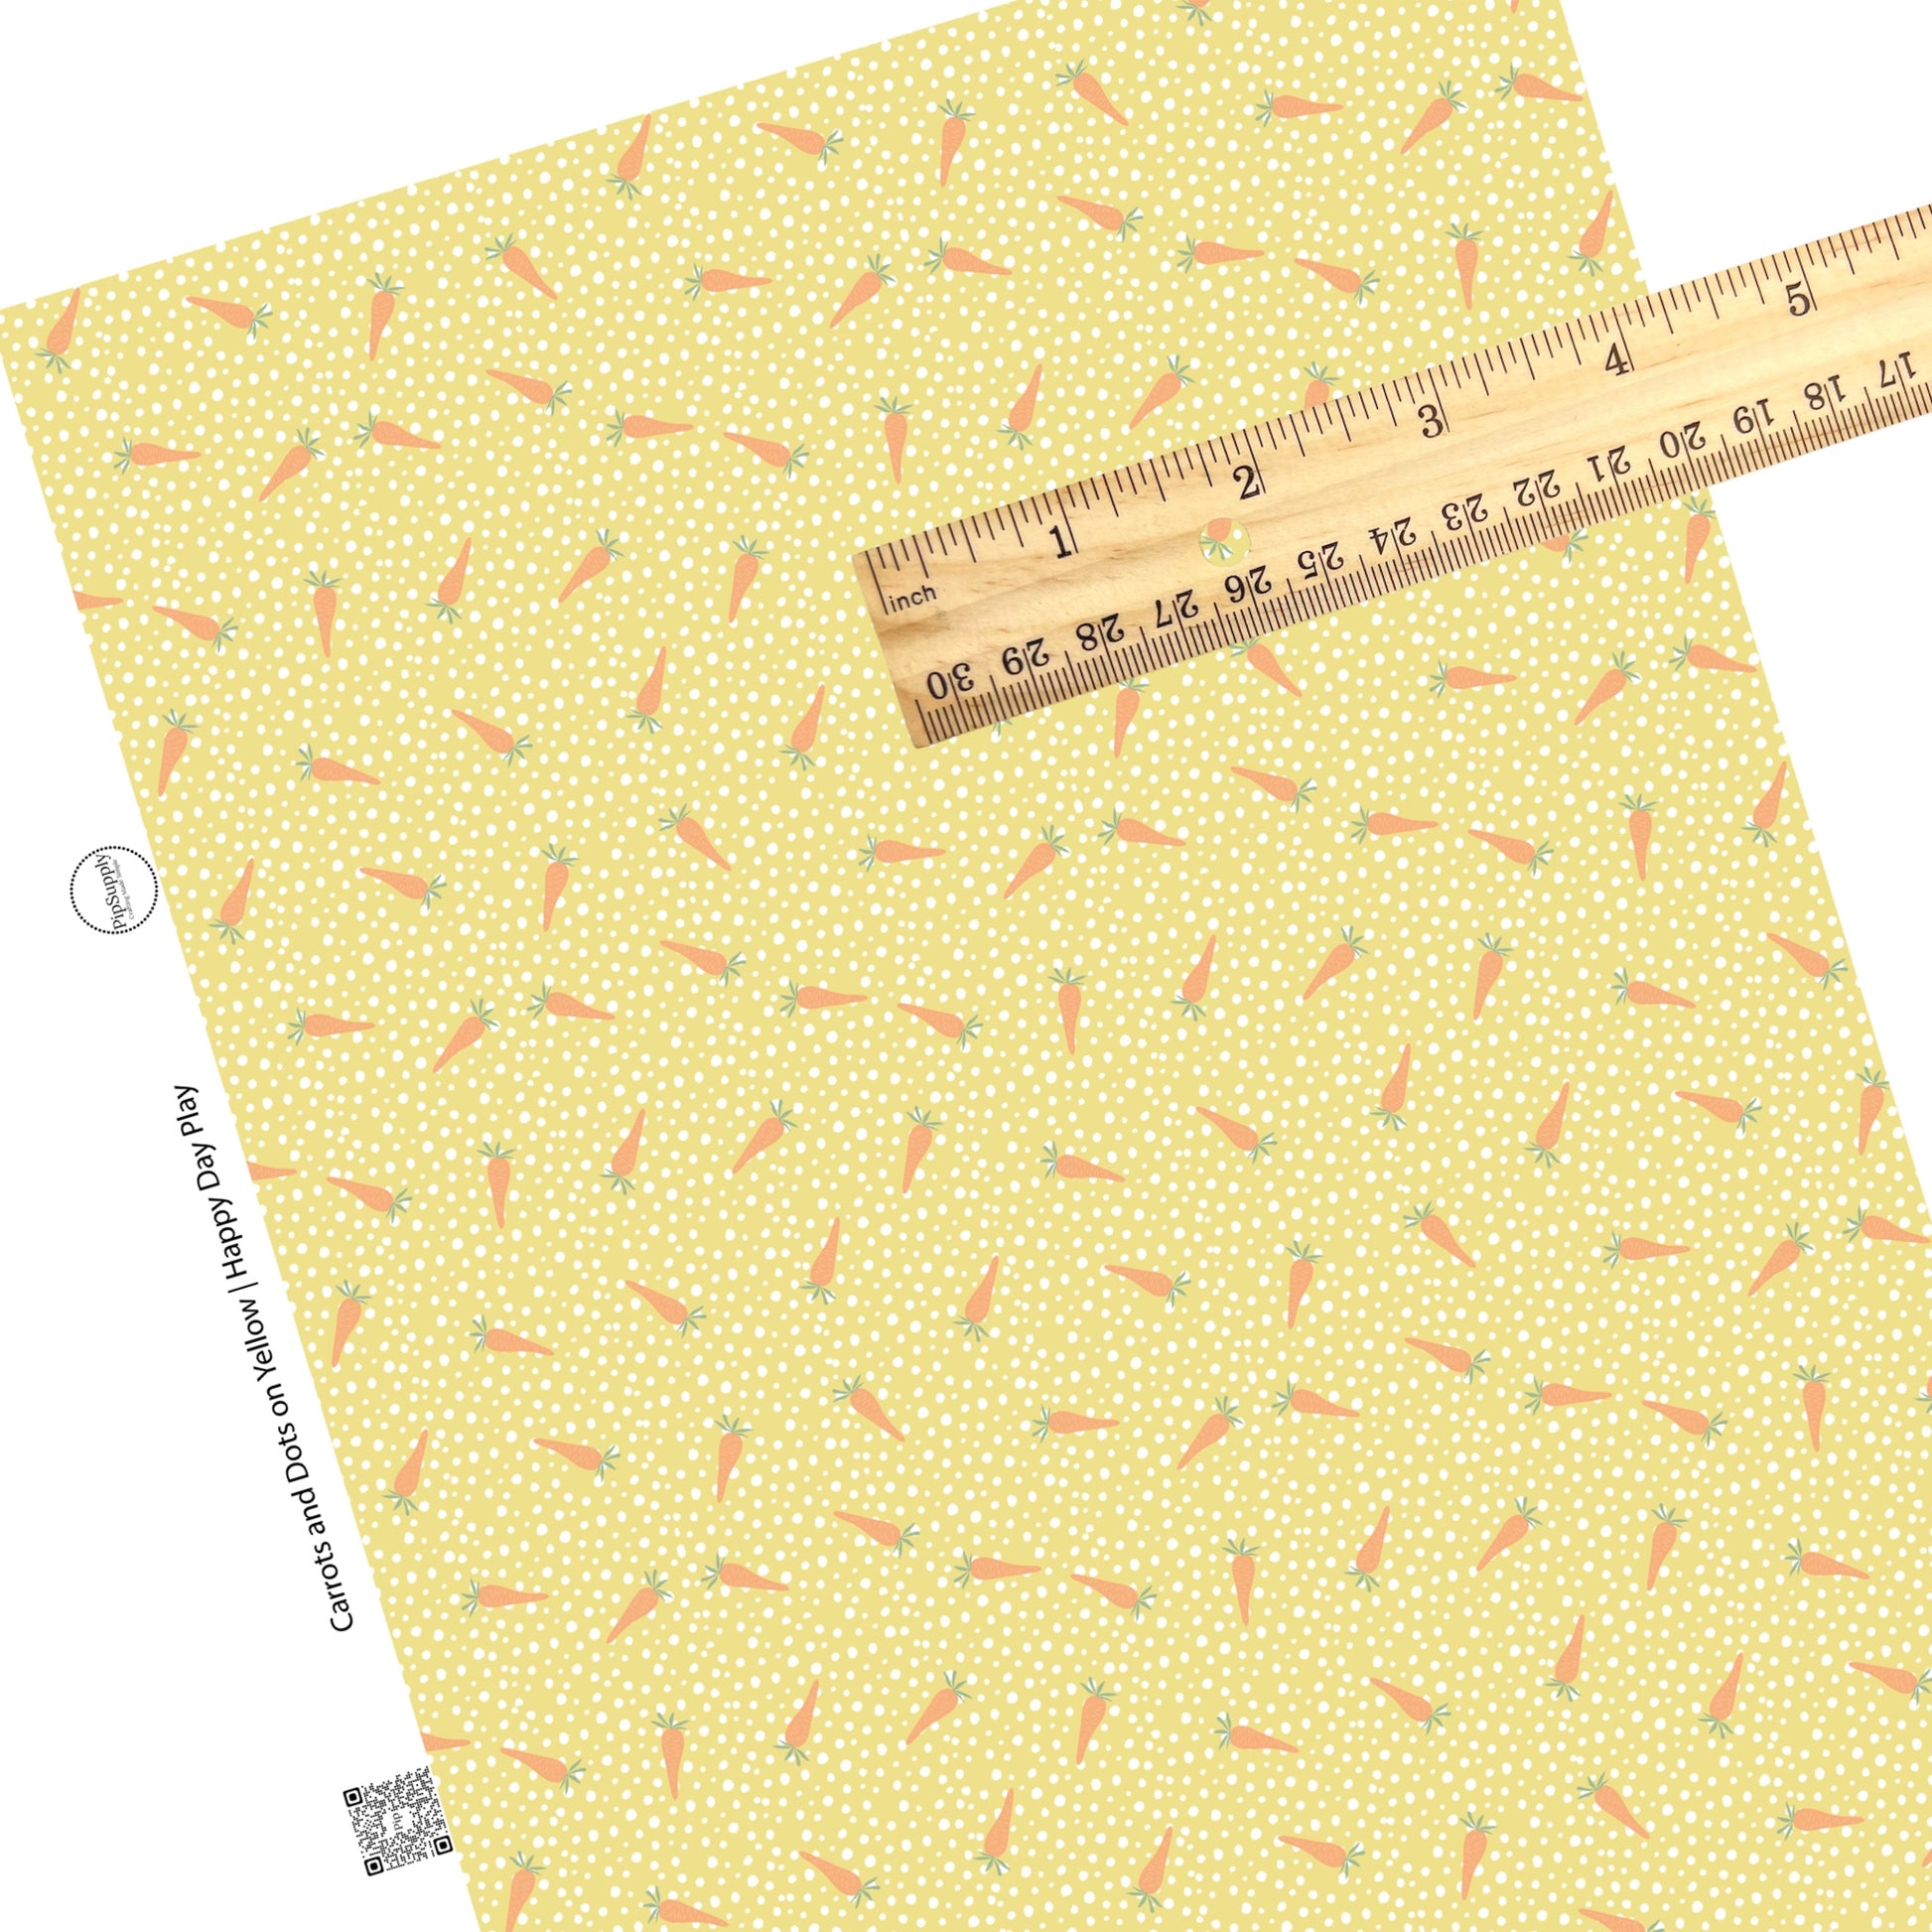 These spring pattern themed faux leather sheets contain the following design elements: tiny carrots surrounded by white dots on yellow. Our CPSIA compliant faux leather sheets or rolls can be used for all types of crafting projects.